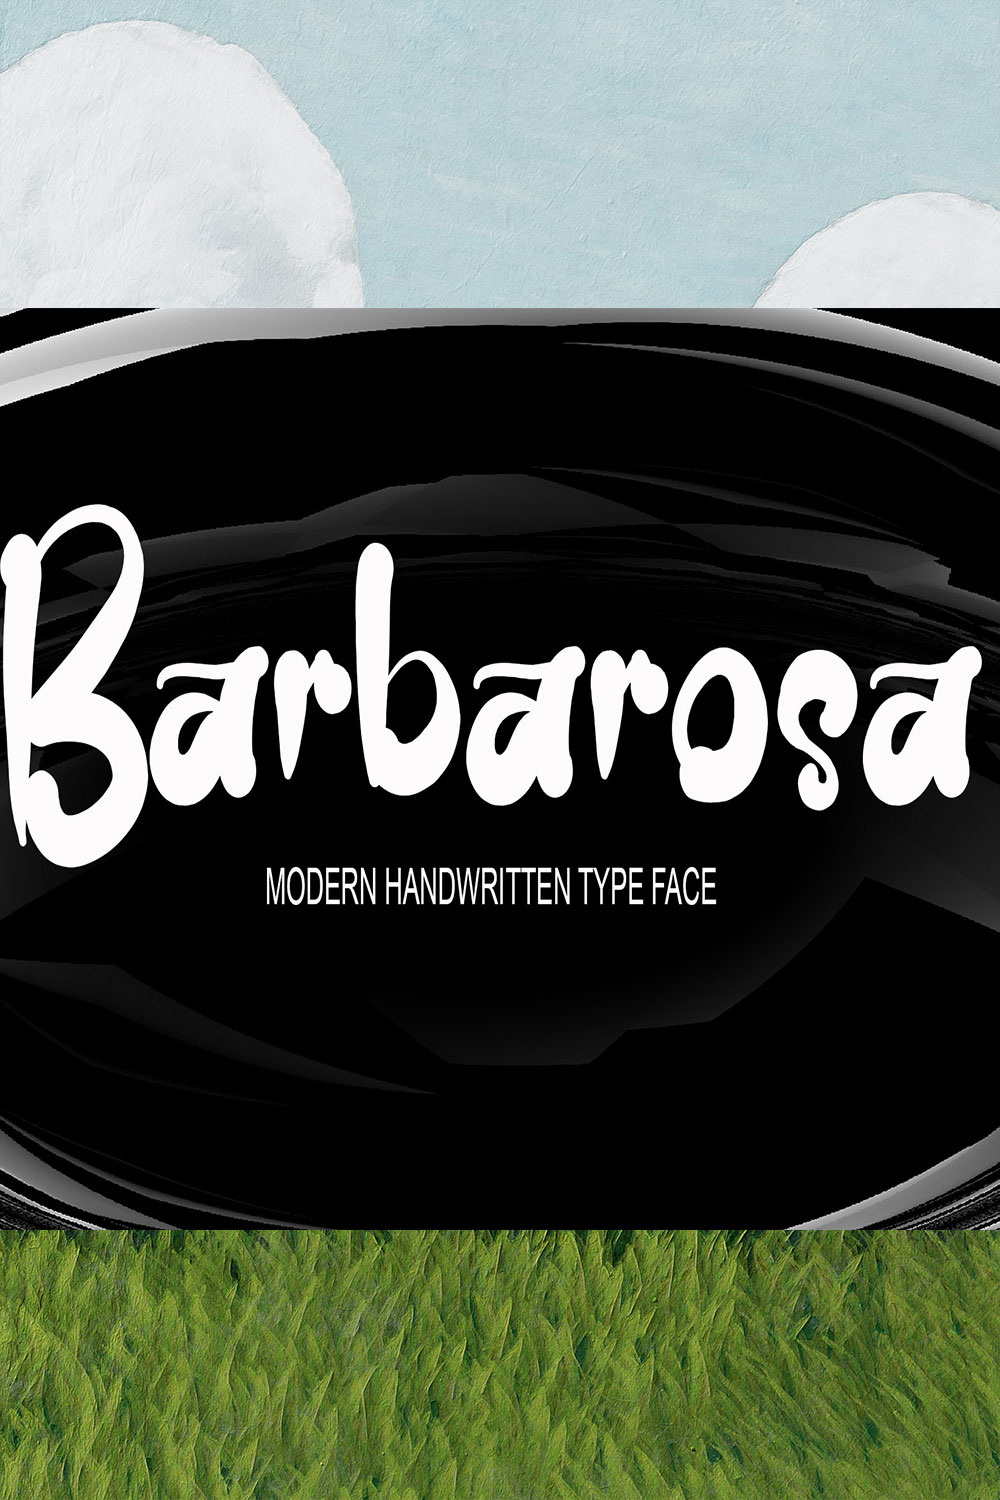 Image with text showcasing the gorgeous Barbarosa font.